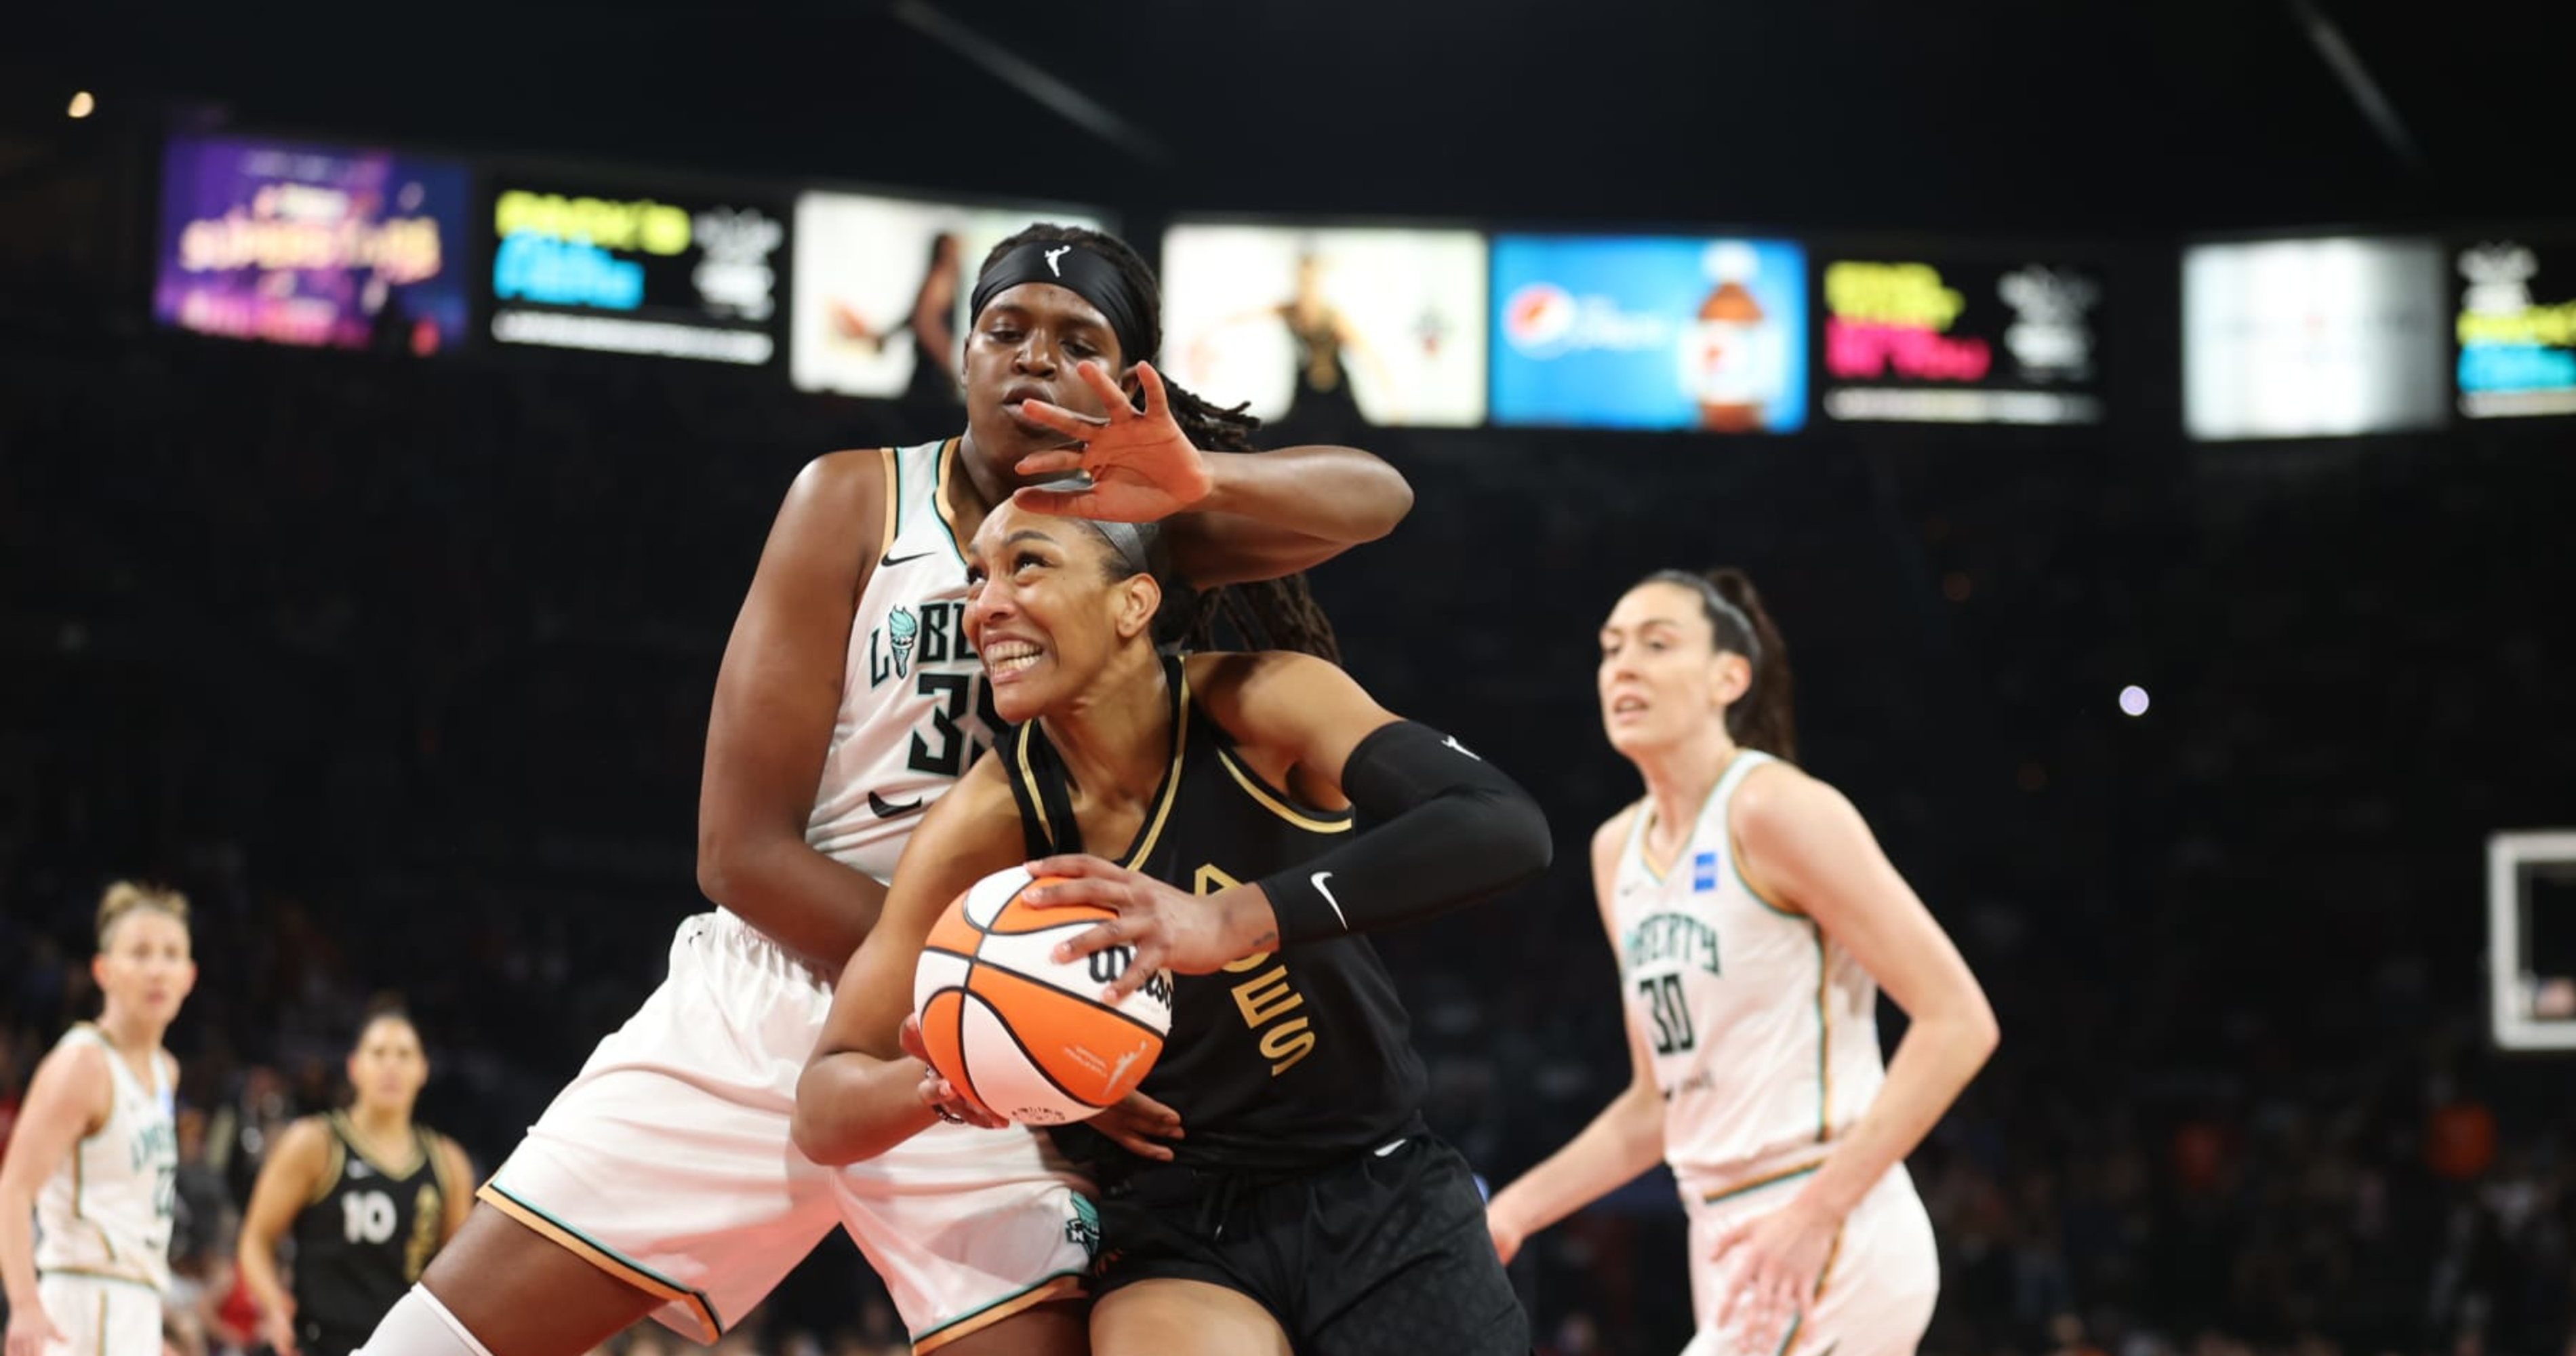 Home cooking: Jones, Stewart lead Liberty past Aces to avoid WNBA